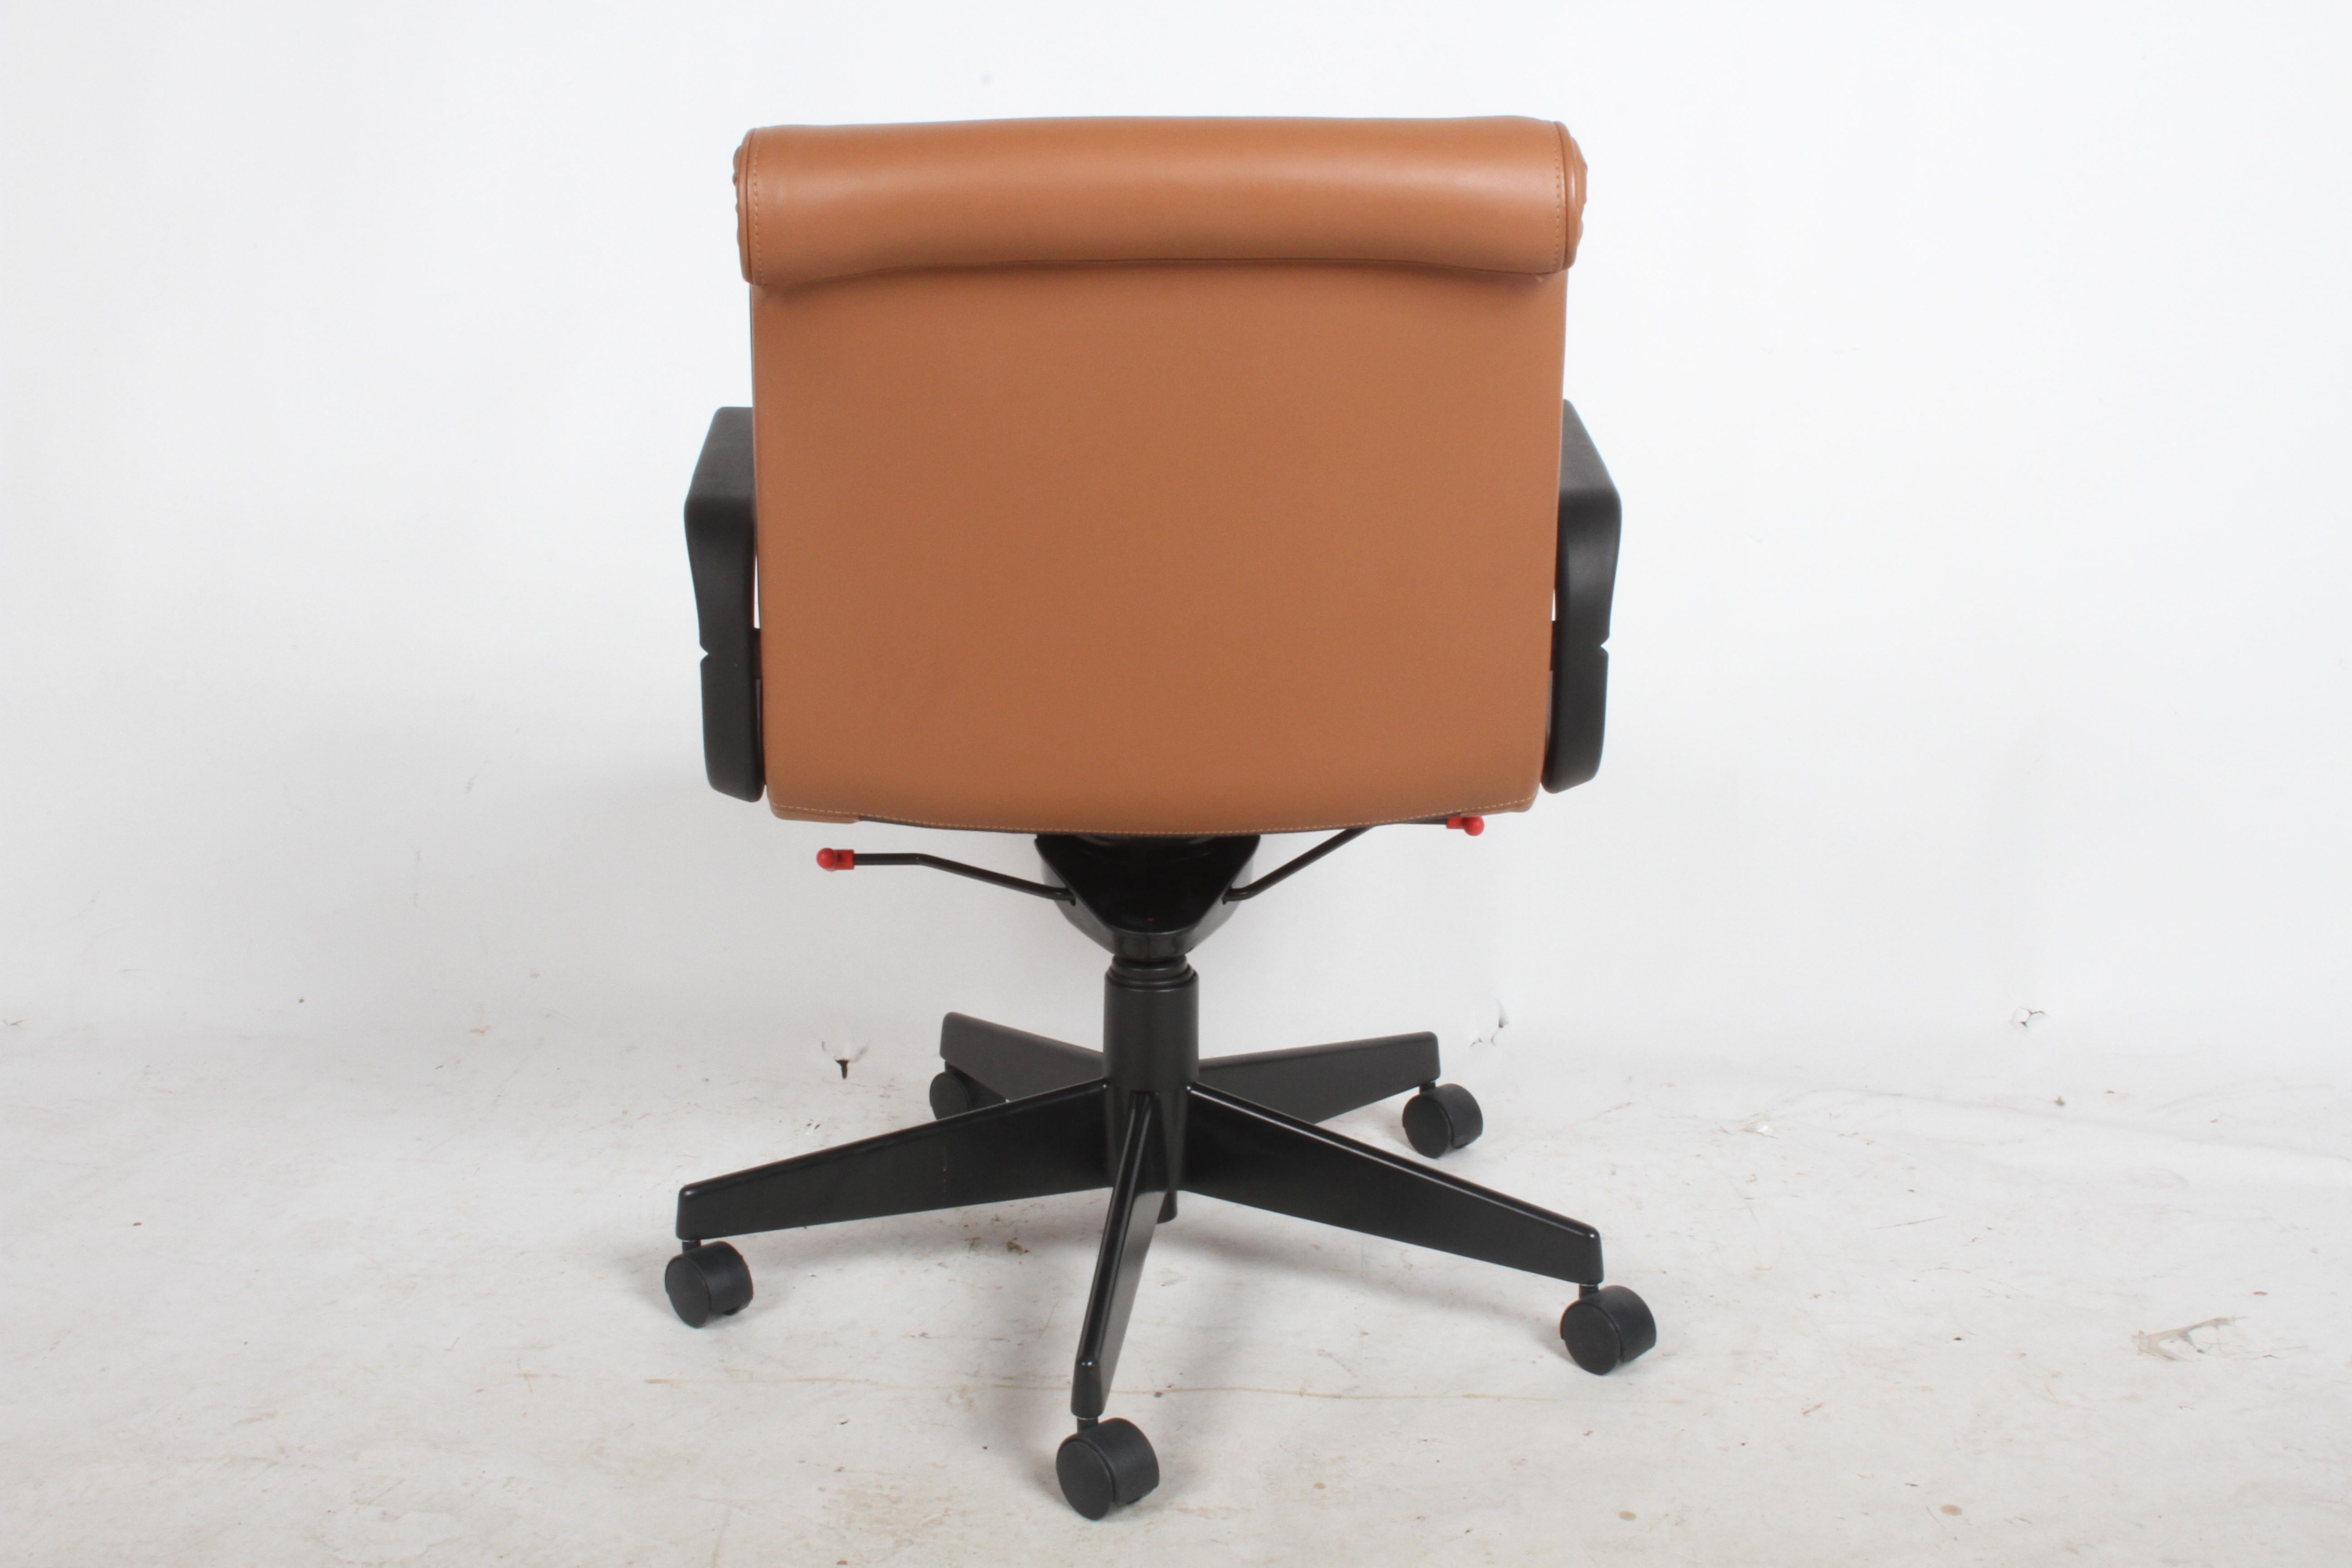 Late 20th Century Richard Sapper for Knoll Desk, Task, Executive or Conference Chair -Tan Leather